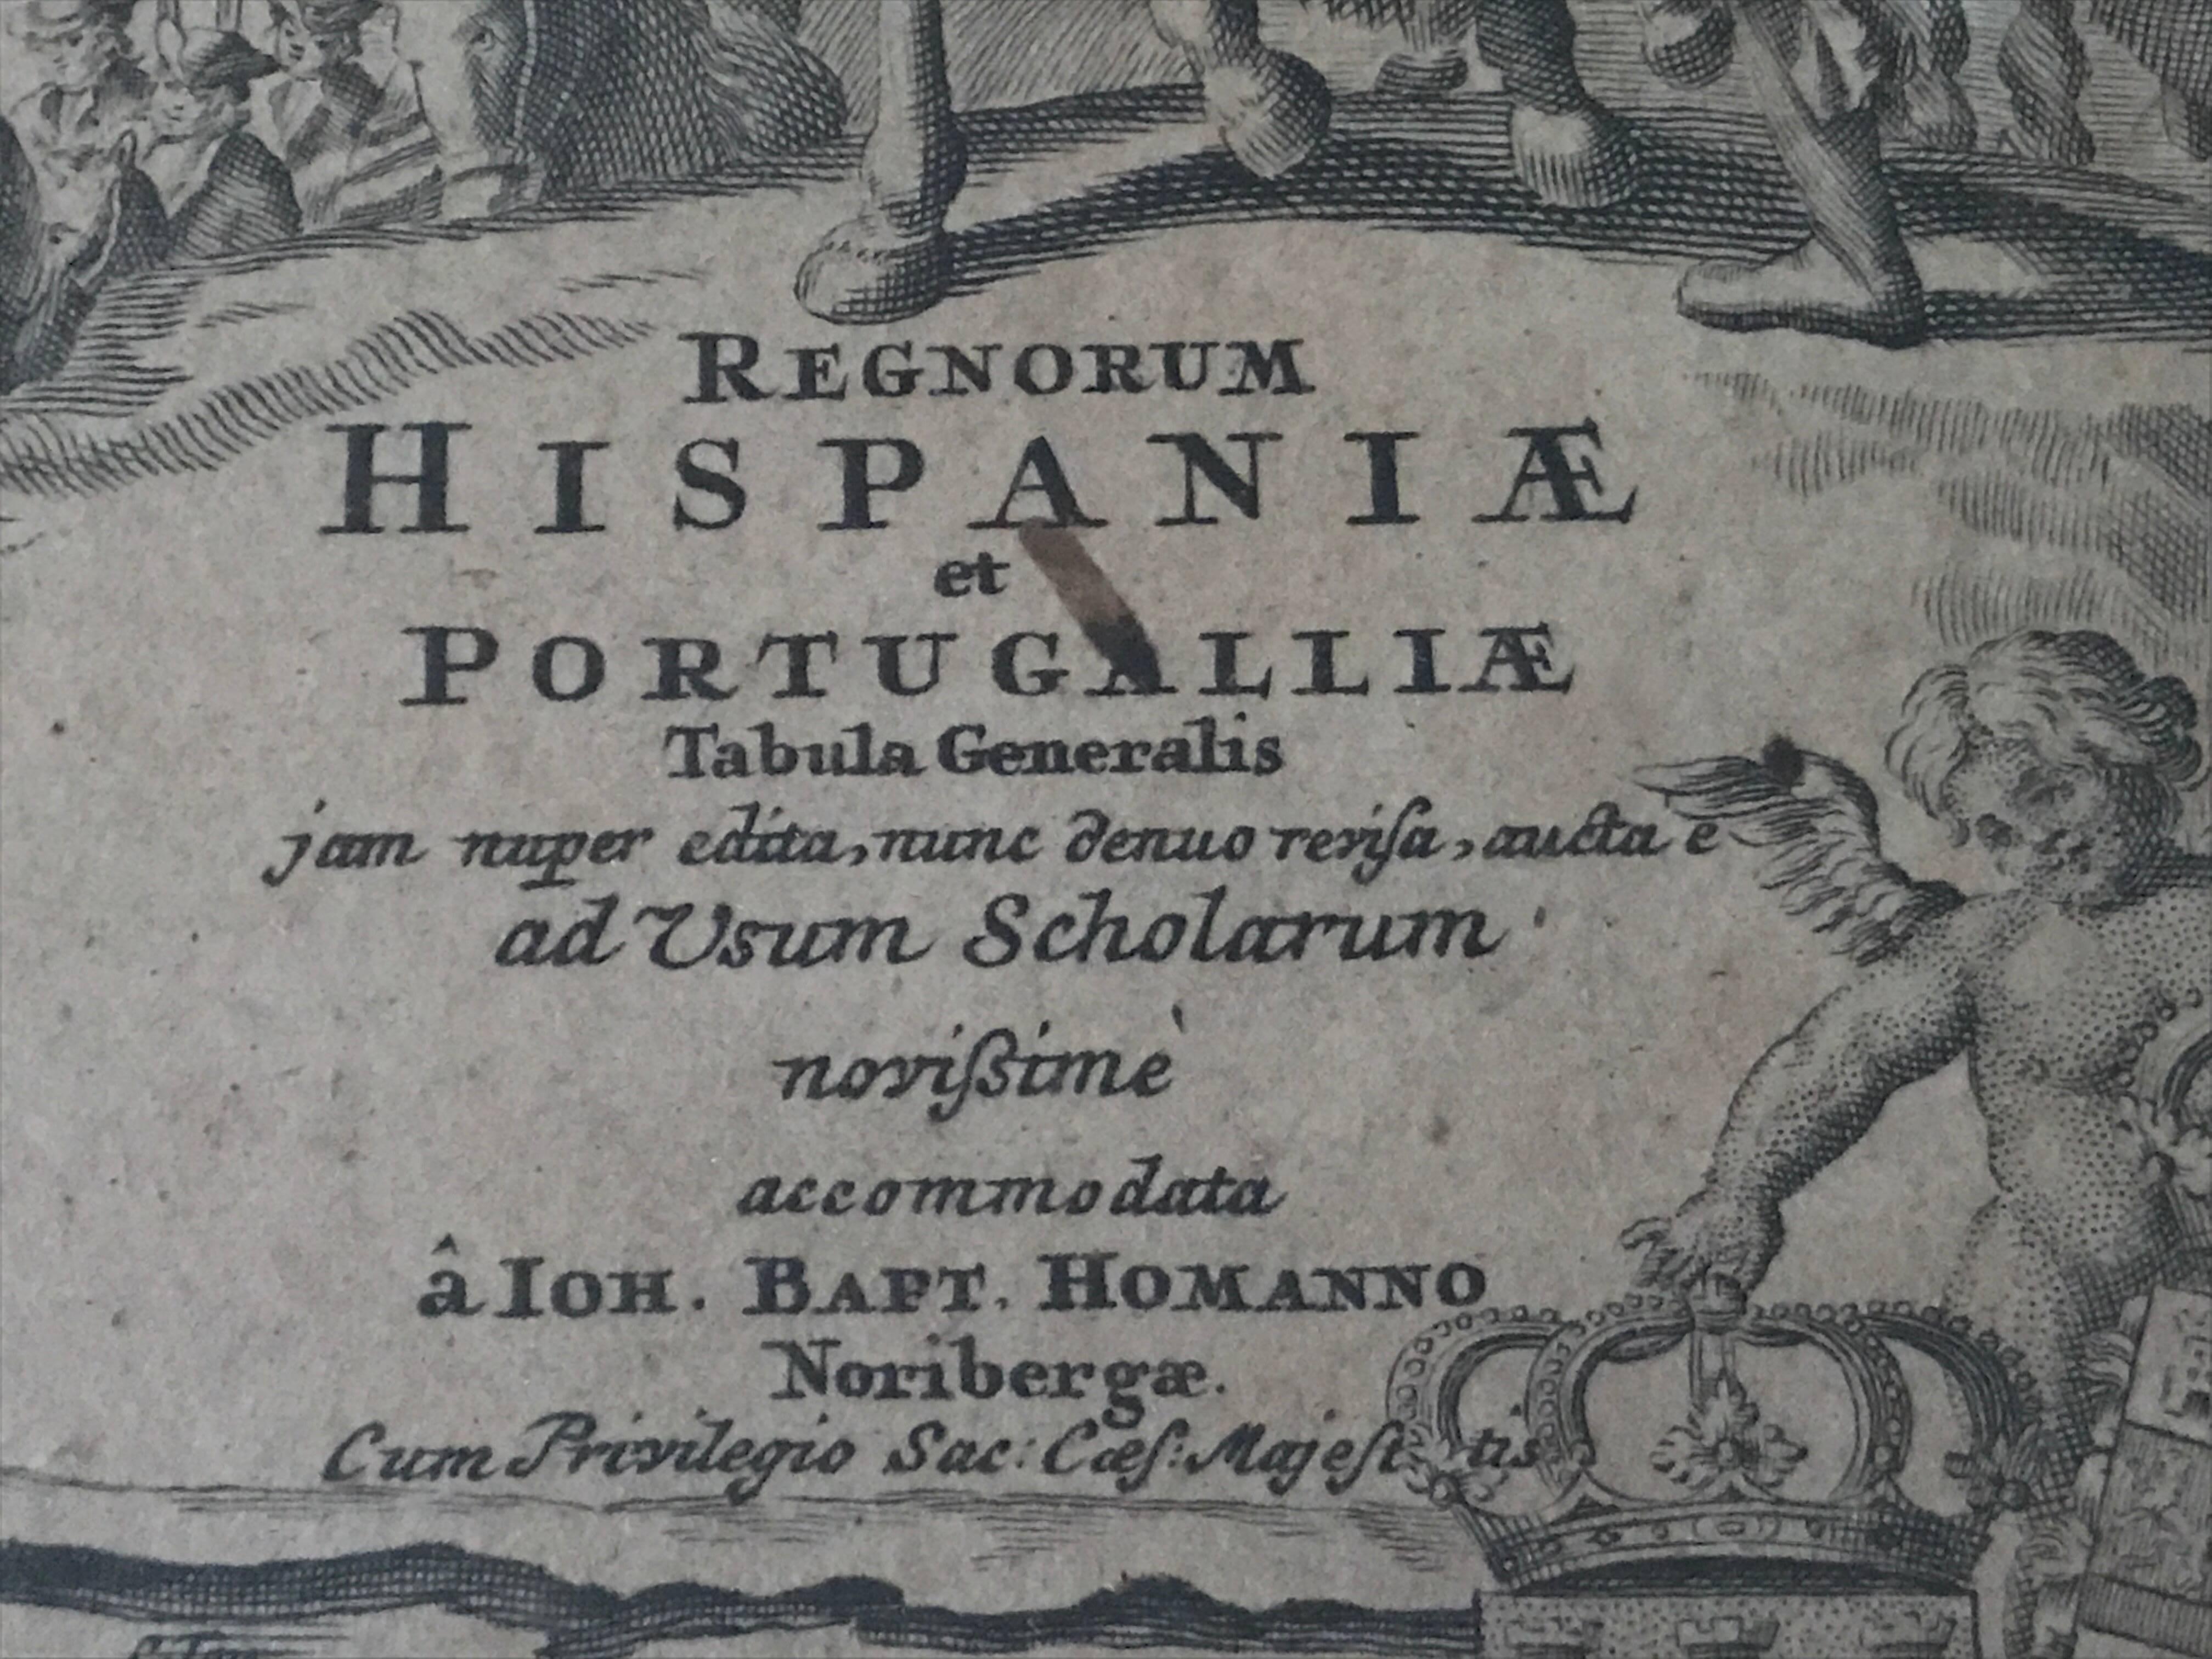 Rare map 1710 Johann Homann Regnorum Hispaniae et Portugalliae Taula Generalis 
Very decorative example of Homann's earliest map of Spain, Portugal and the Balleric Islands, with decorative large cartouche, and elaborate naval scene.

Of the